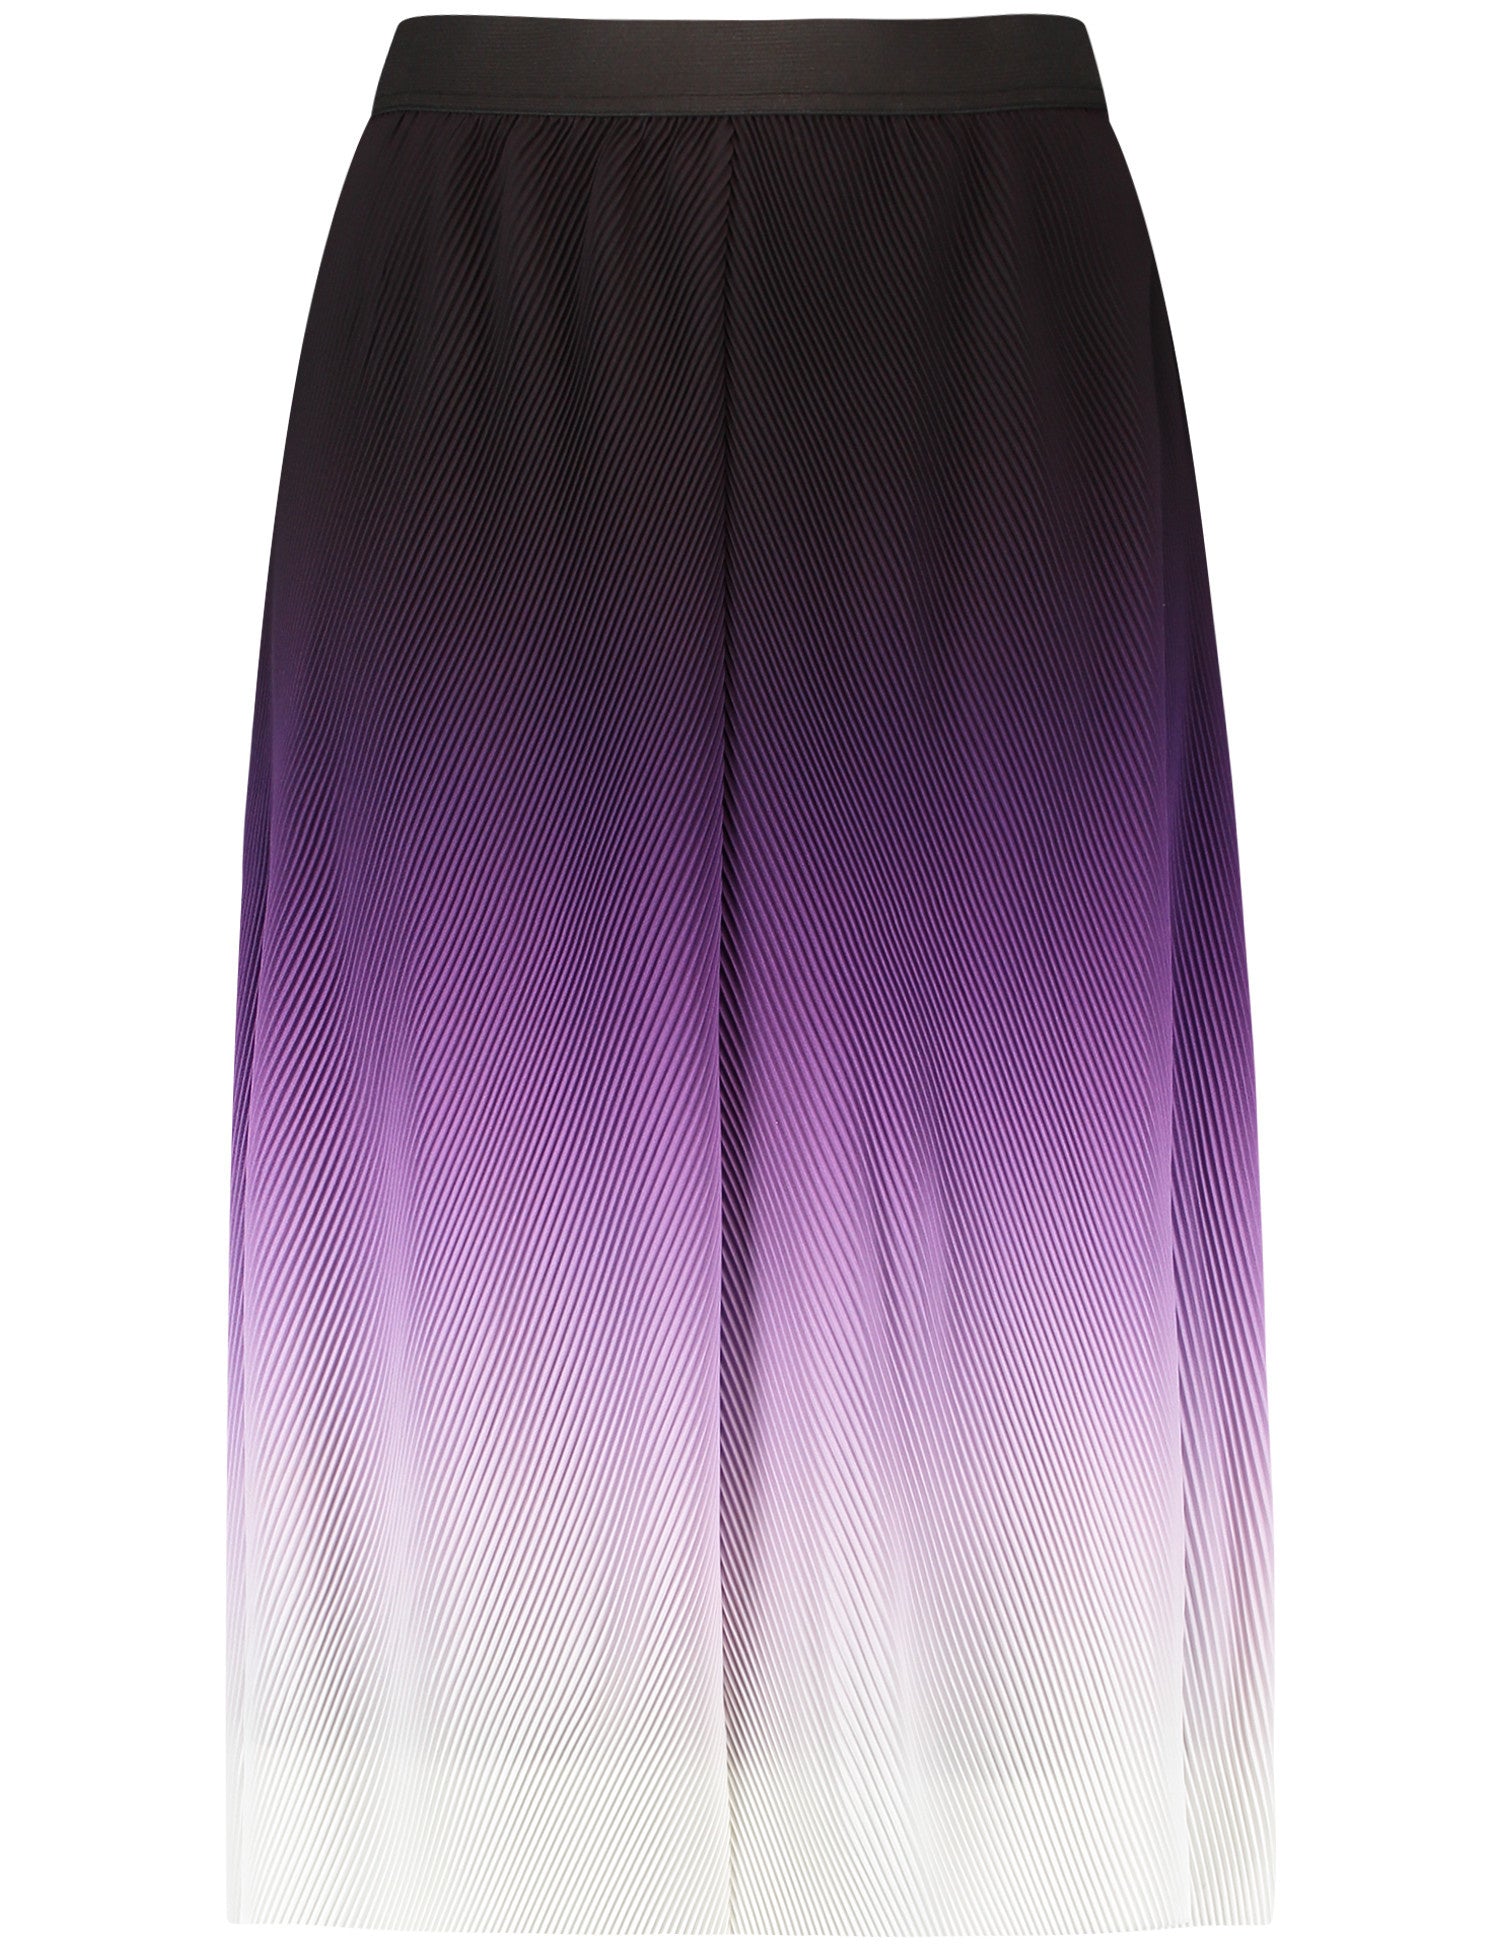 Pleated Skirt With Colour Gradiation And Elasticated Waistband_02